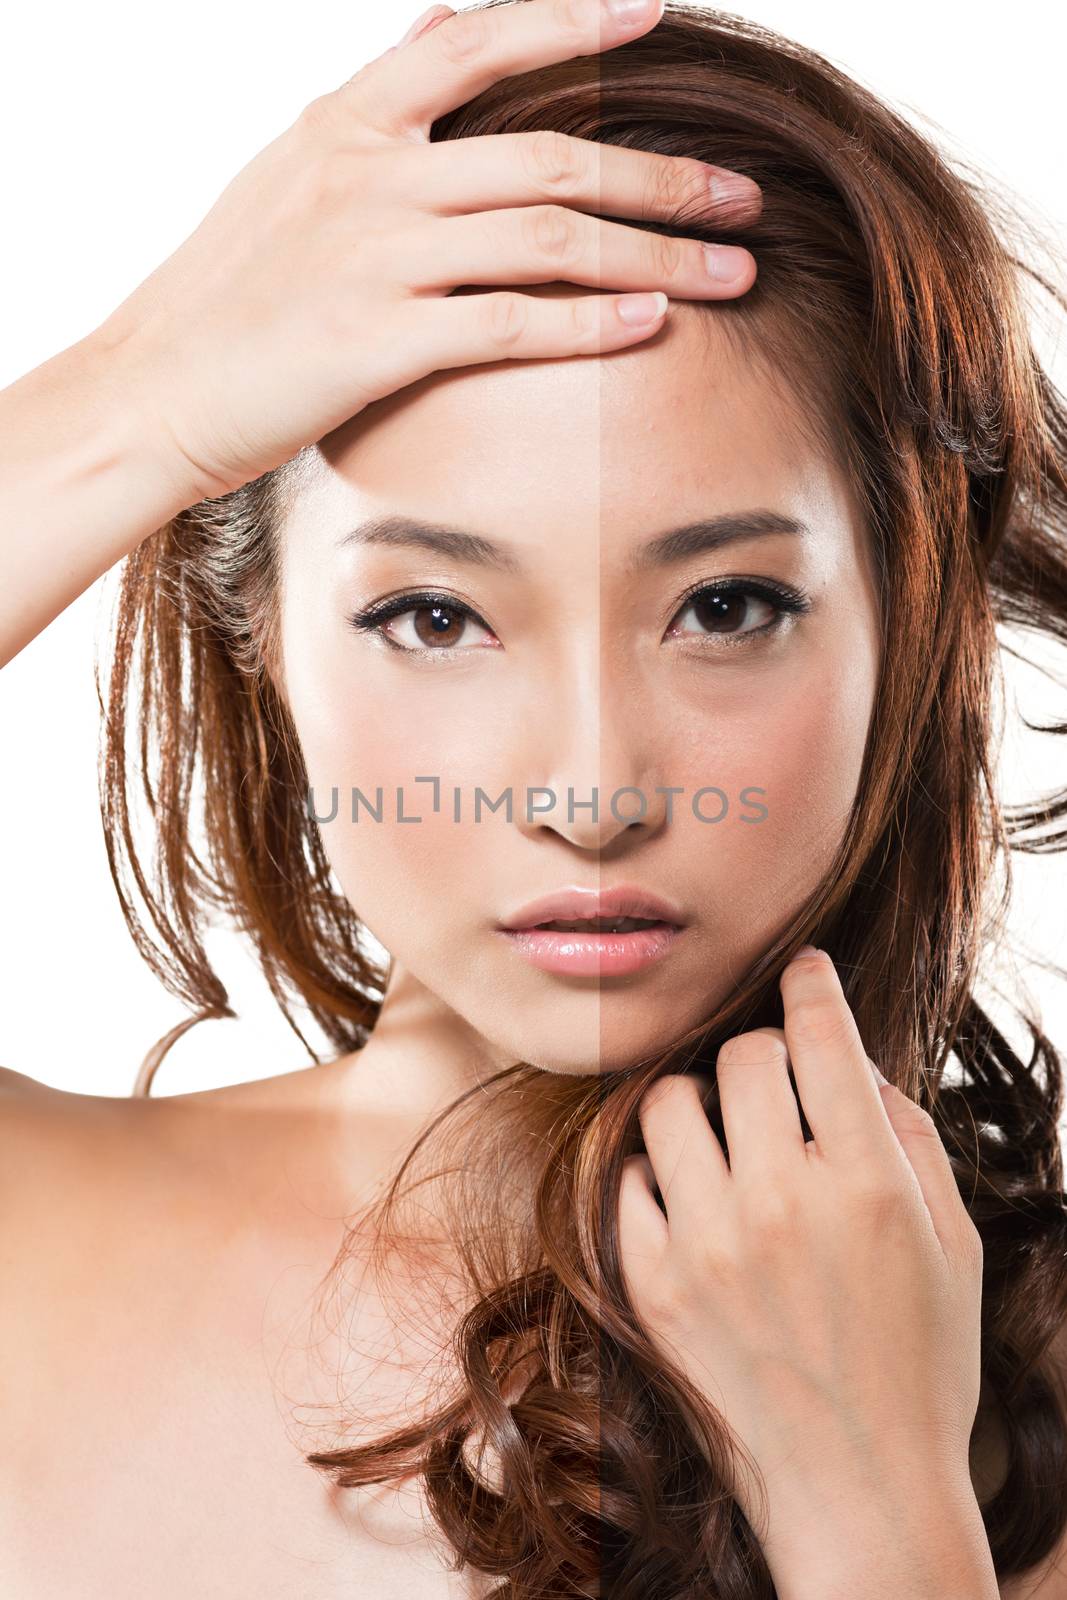 Face of beautiful Asian woman before and after retouch, concept of makeup or plastic surgery.